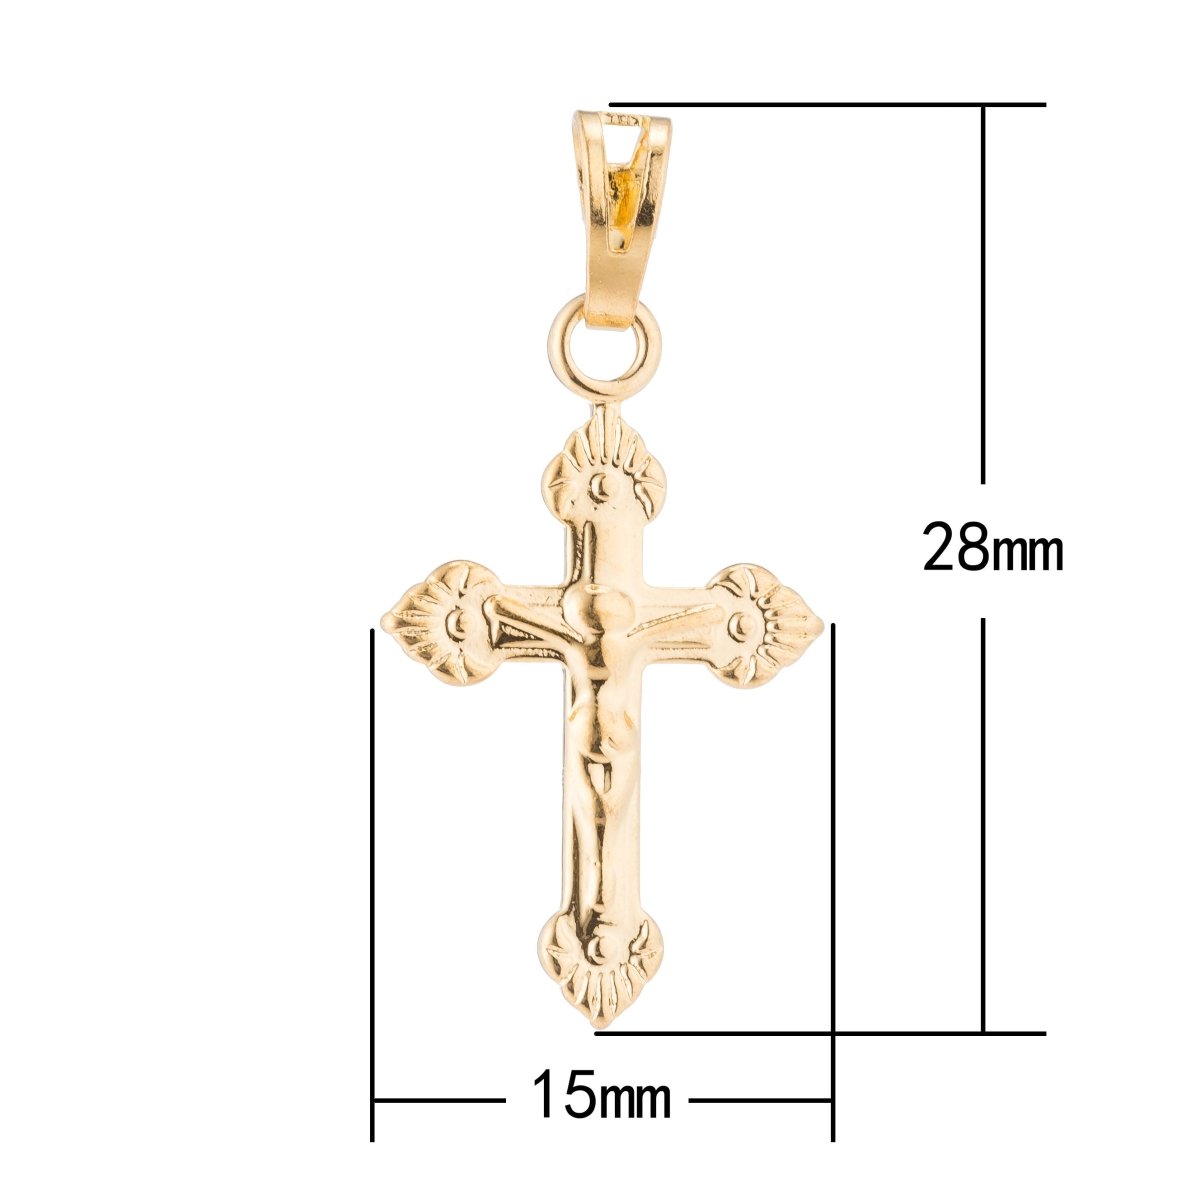 Gold Cross, Faith, Belief, Christian, Catholic, God, Divine, Prayer, Jesus Necklace Pendant Charm Bead Bails Findings for Jewelry Making H-426 - DLUXCA